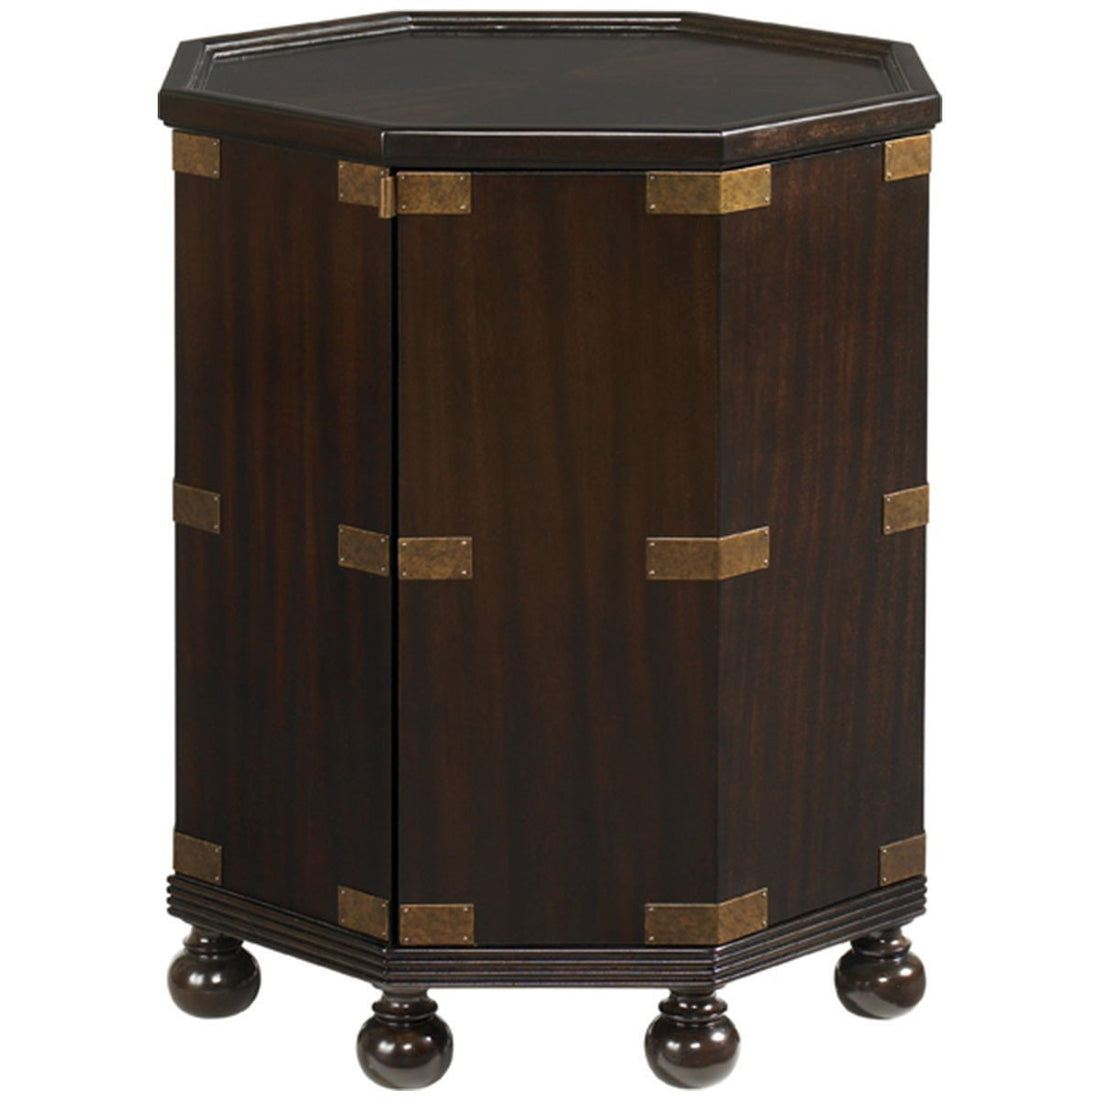 Tommy Bahama Royal Kahala Pacific Campaign Accent Table 537-952